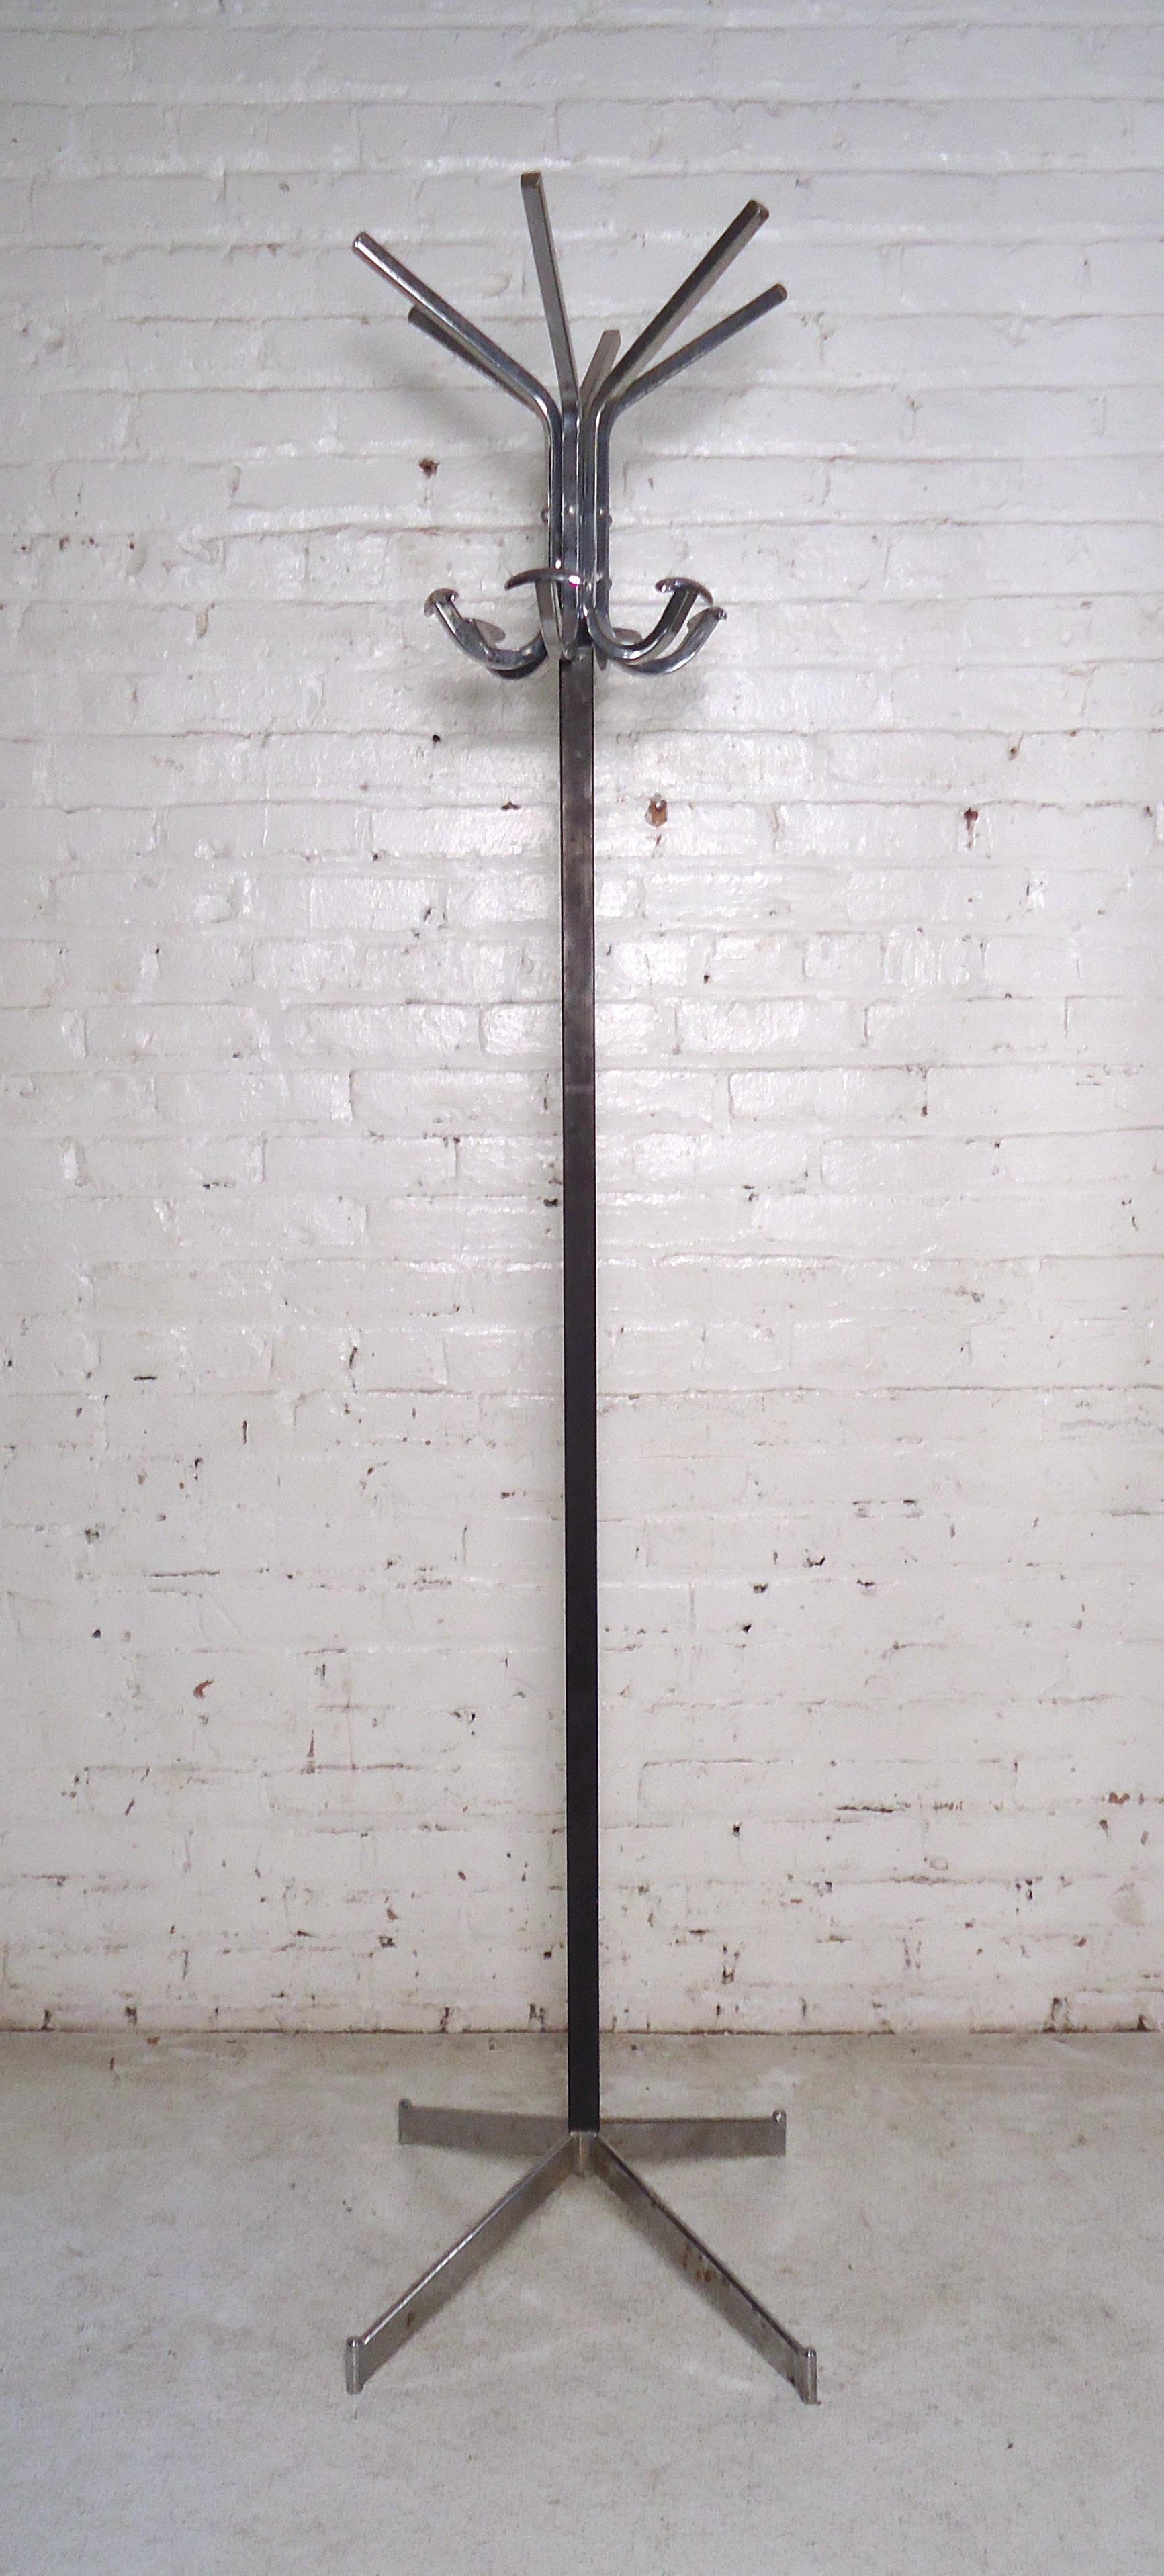 Sleek Industrial coat rack in metal featuring splayed bars to place your hats and jackets.
(Please confirm item location - NY or NJ - with dealer).